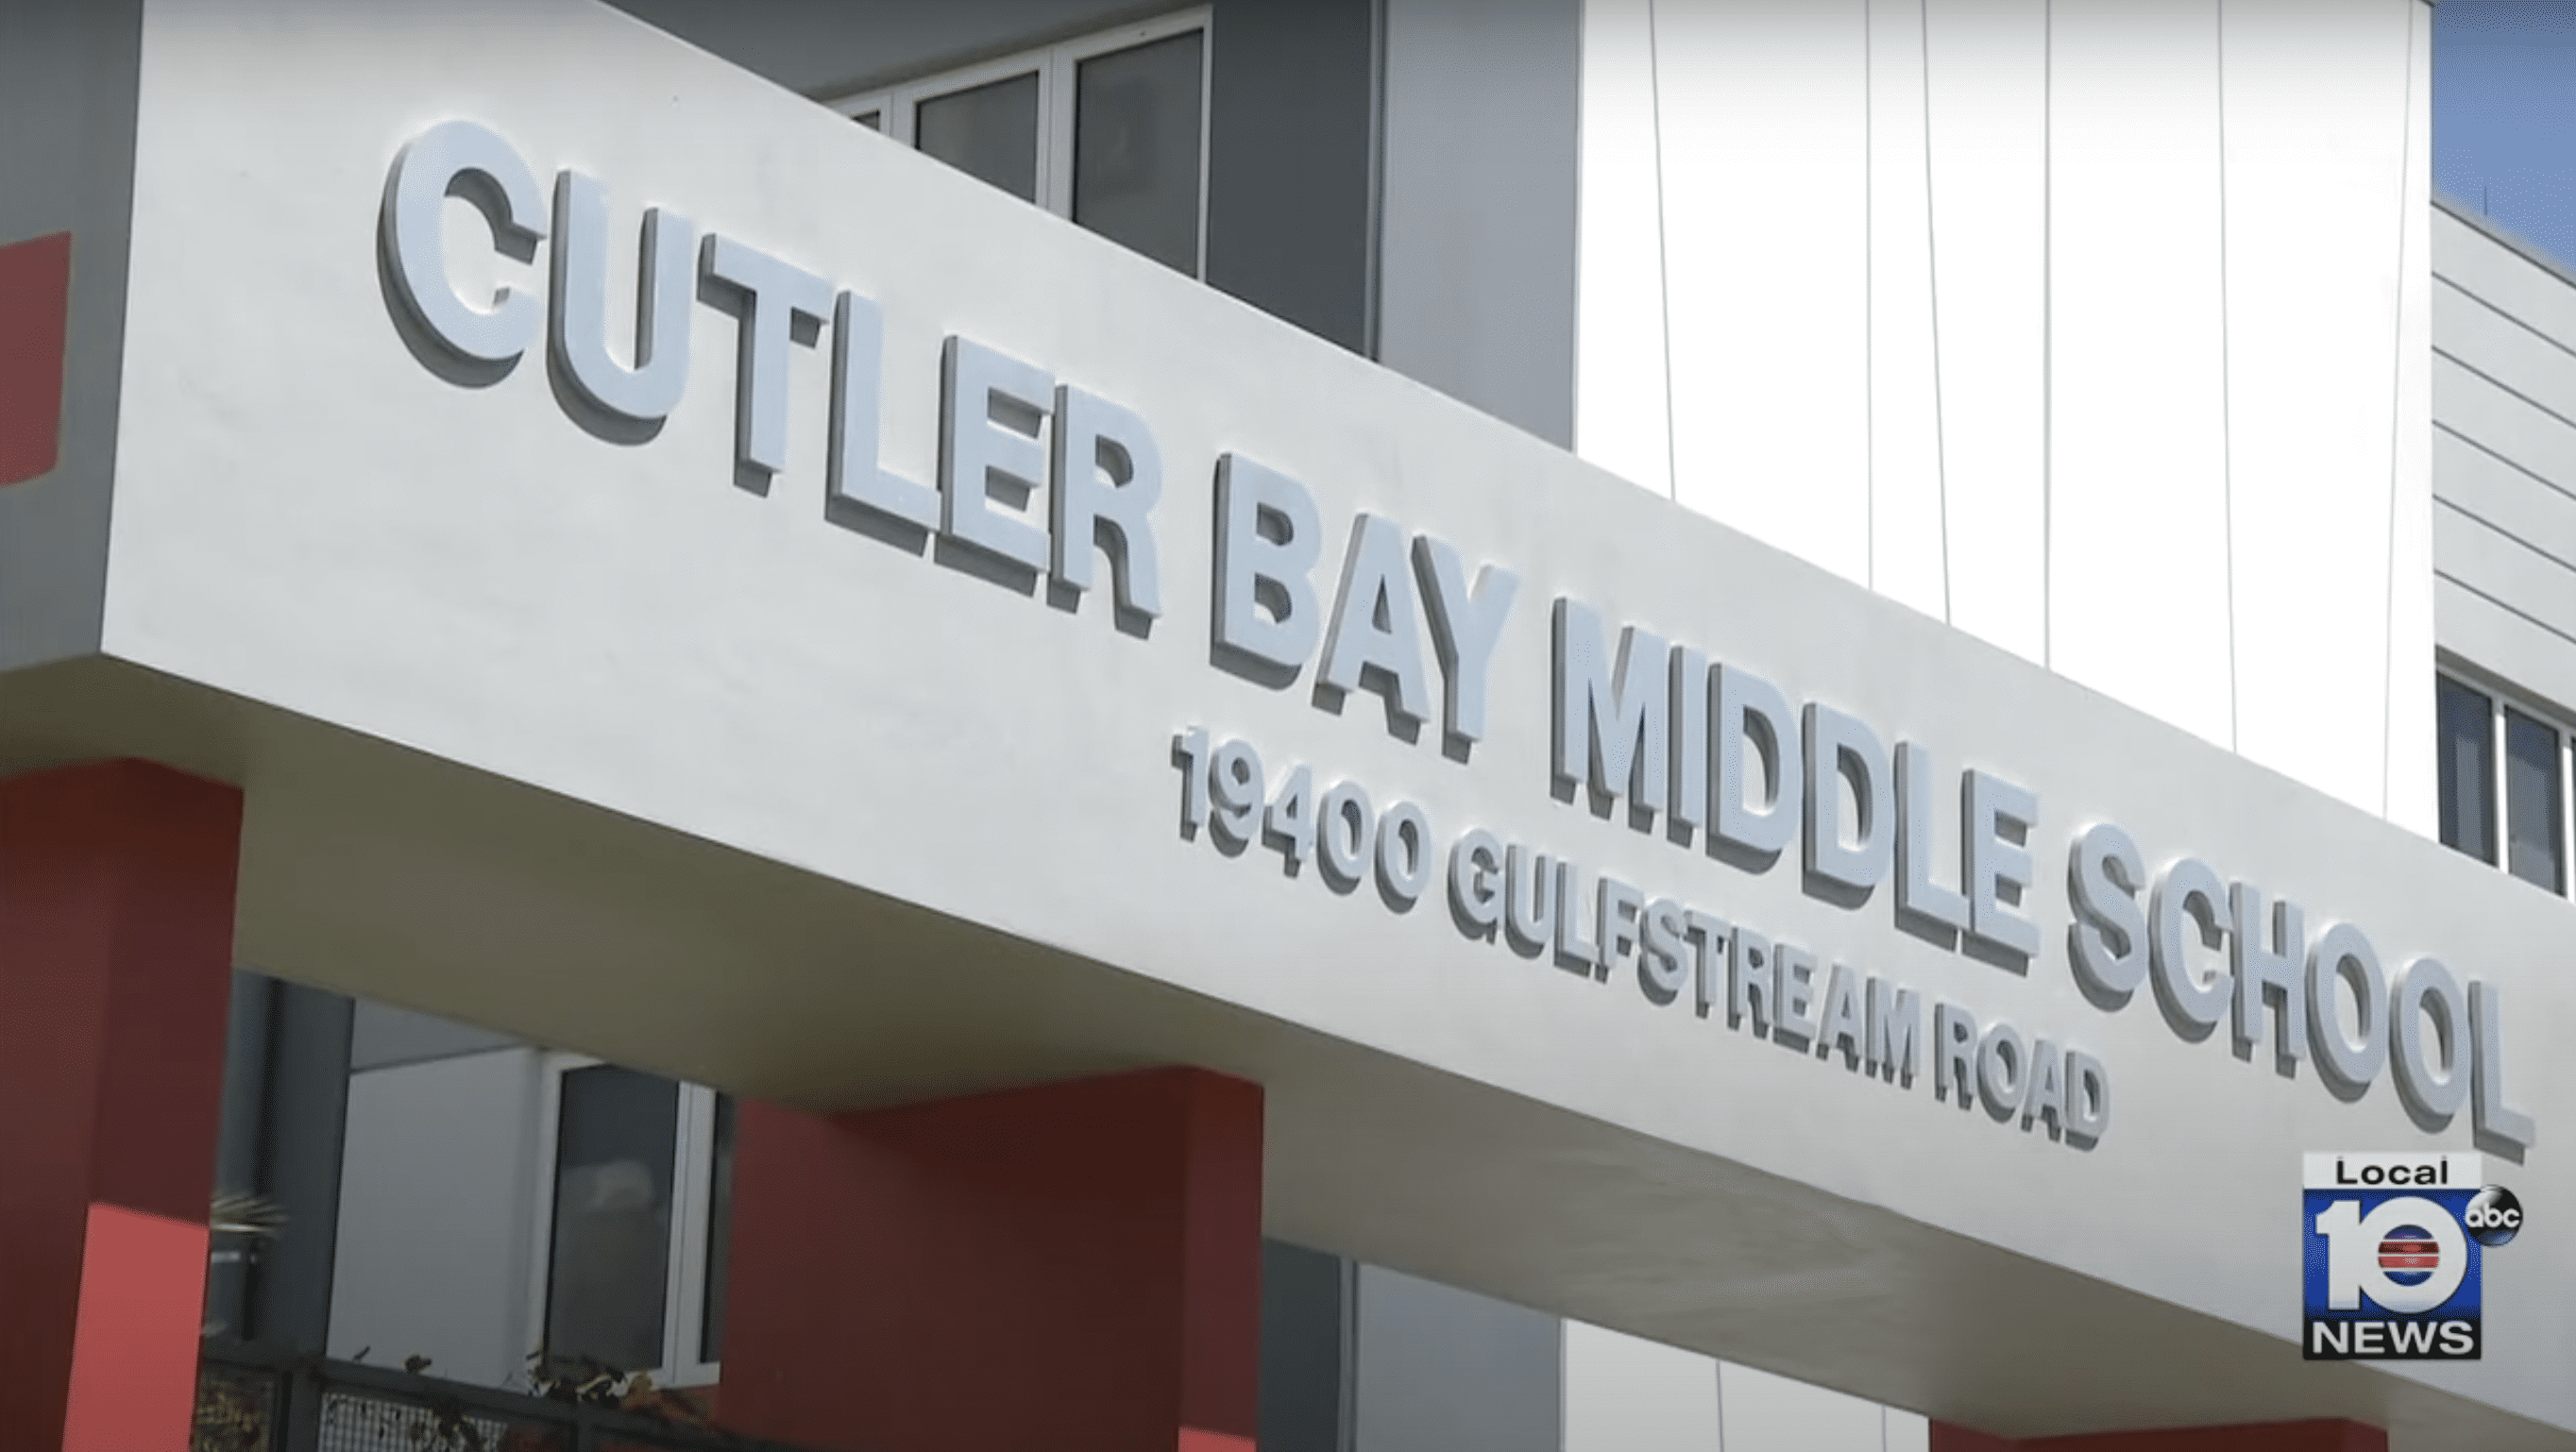 The Cutler Bay Middle School building. | Source: YouTube.com/WPLG Local 10